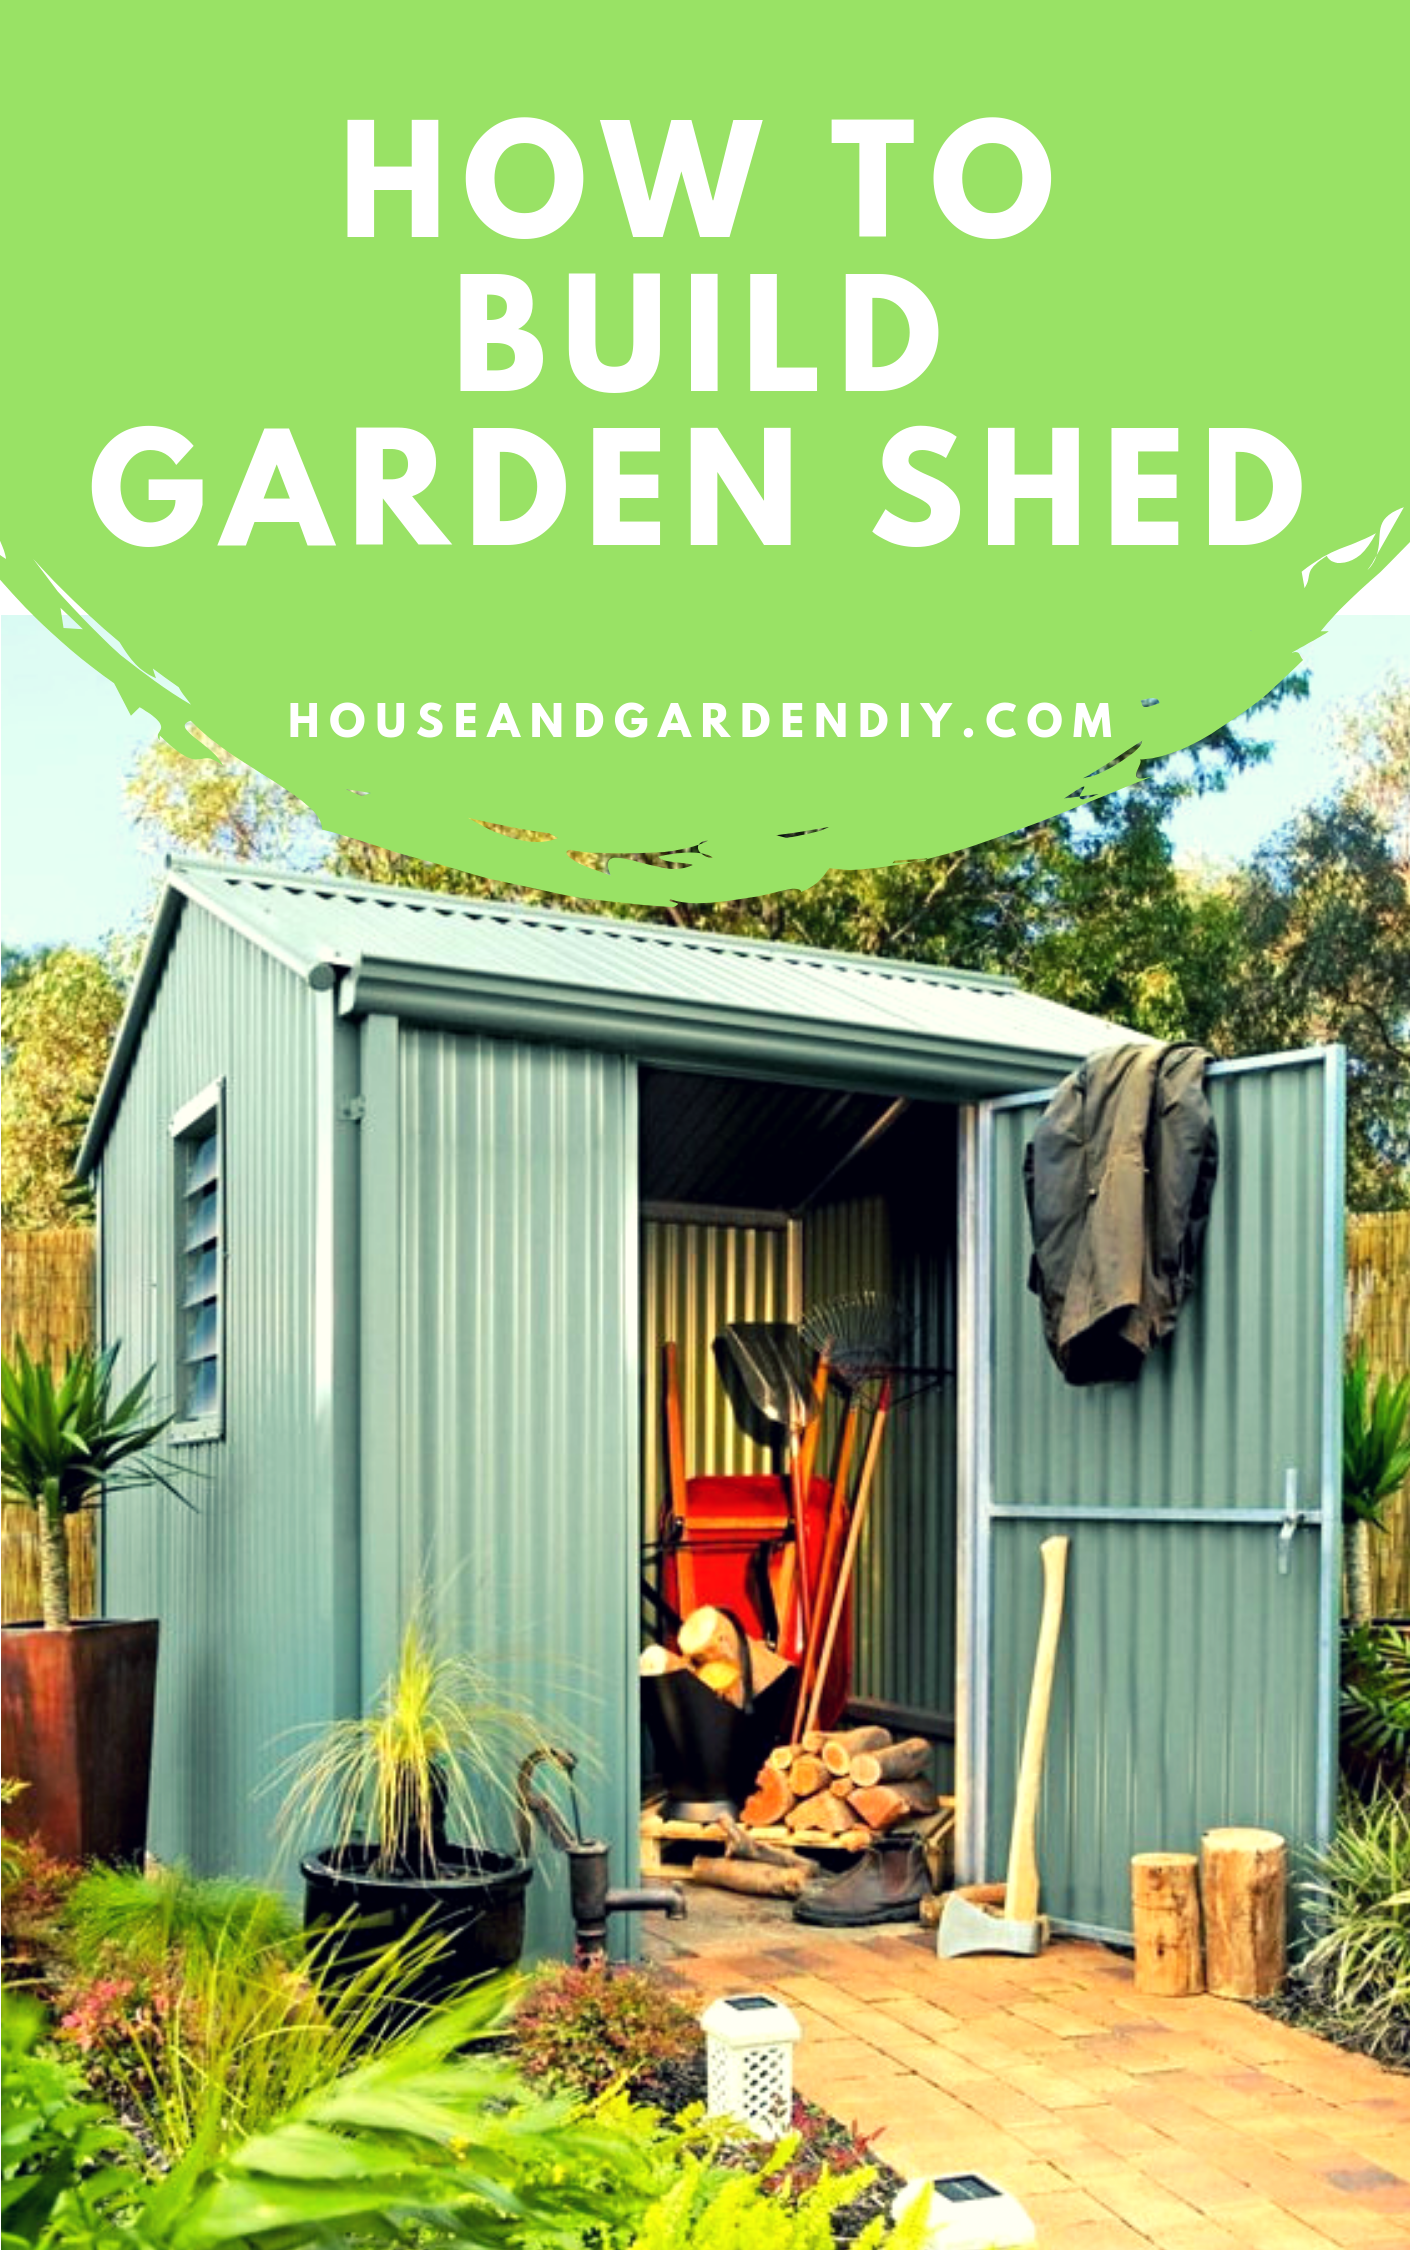 Tips on How to Build Your own Garden Shed